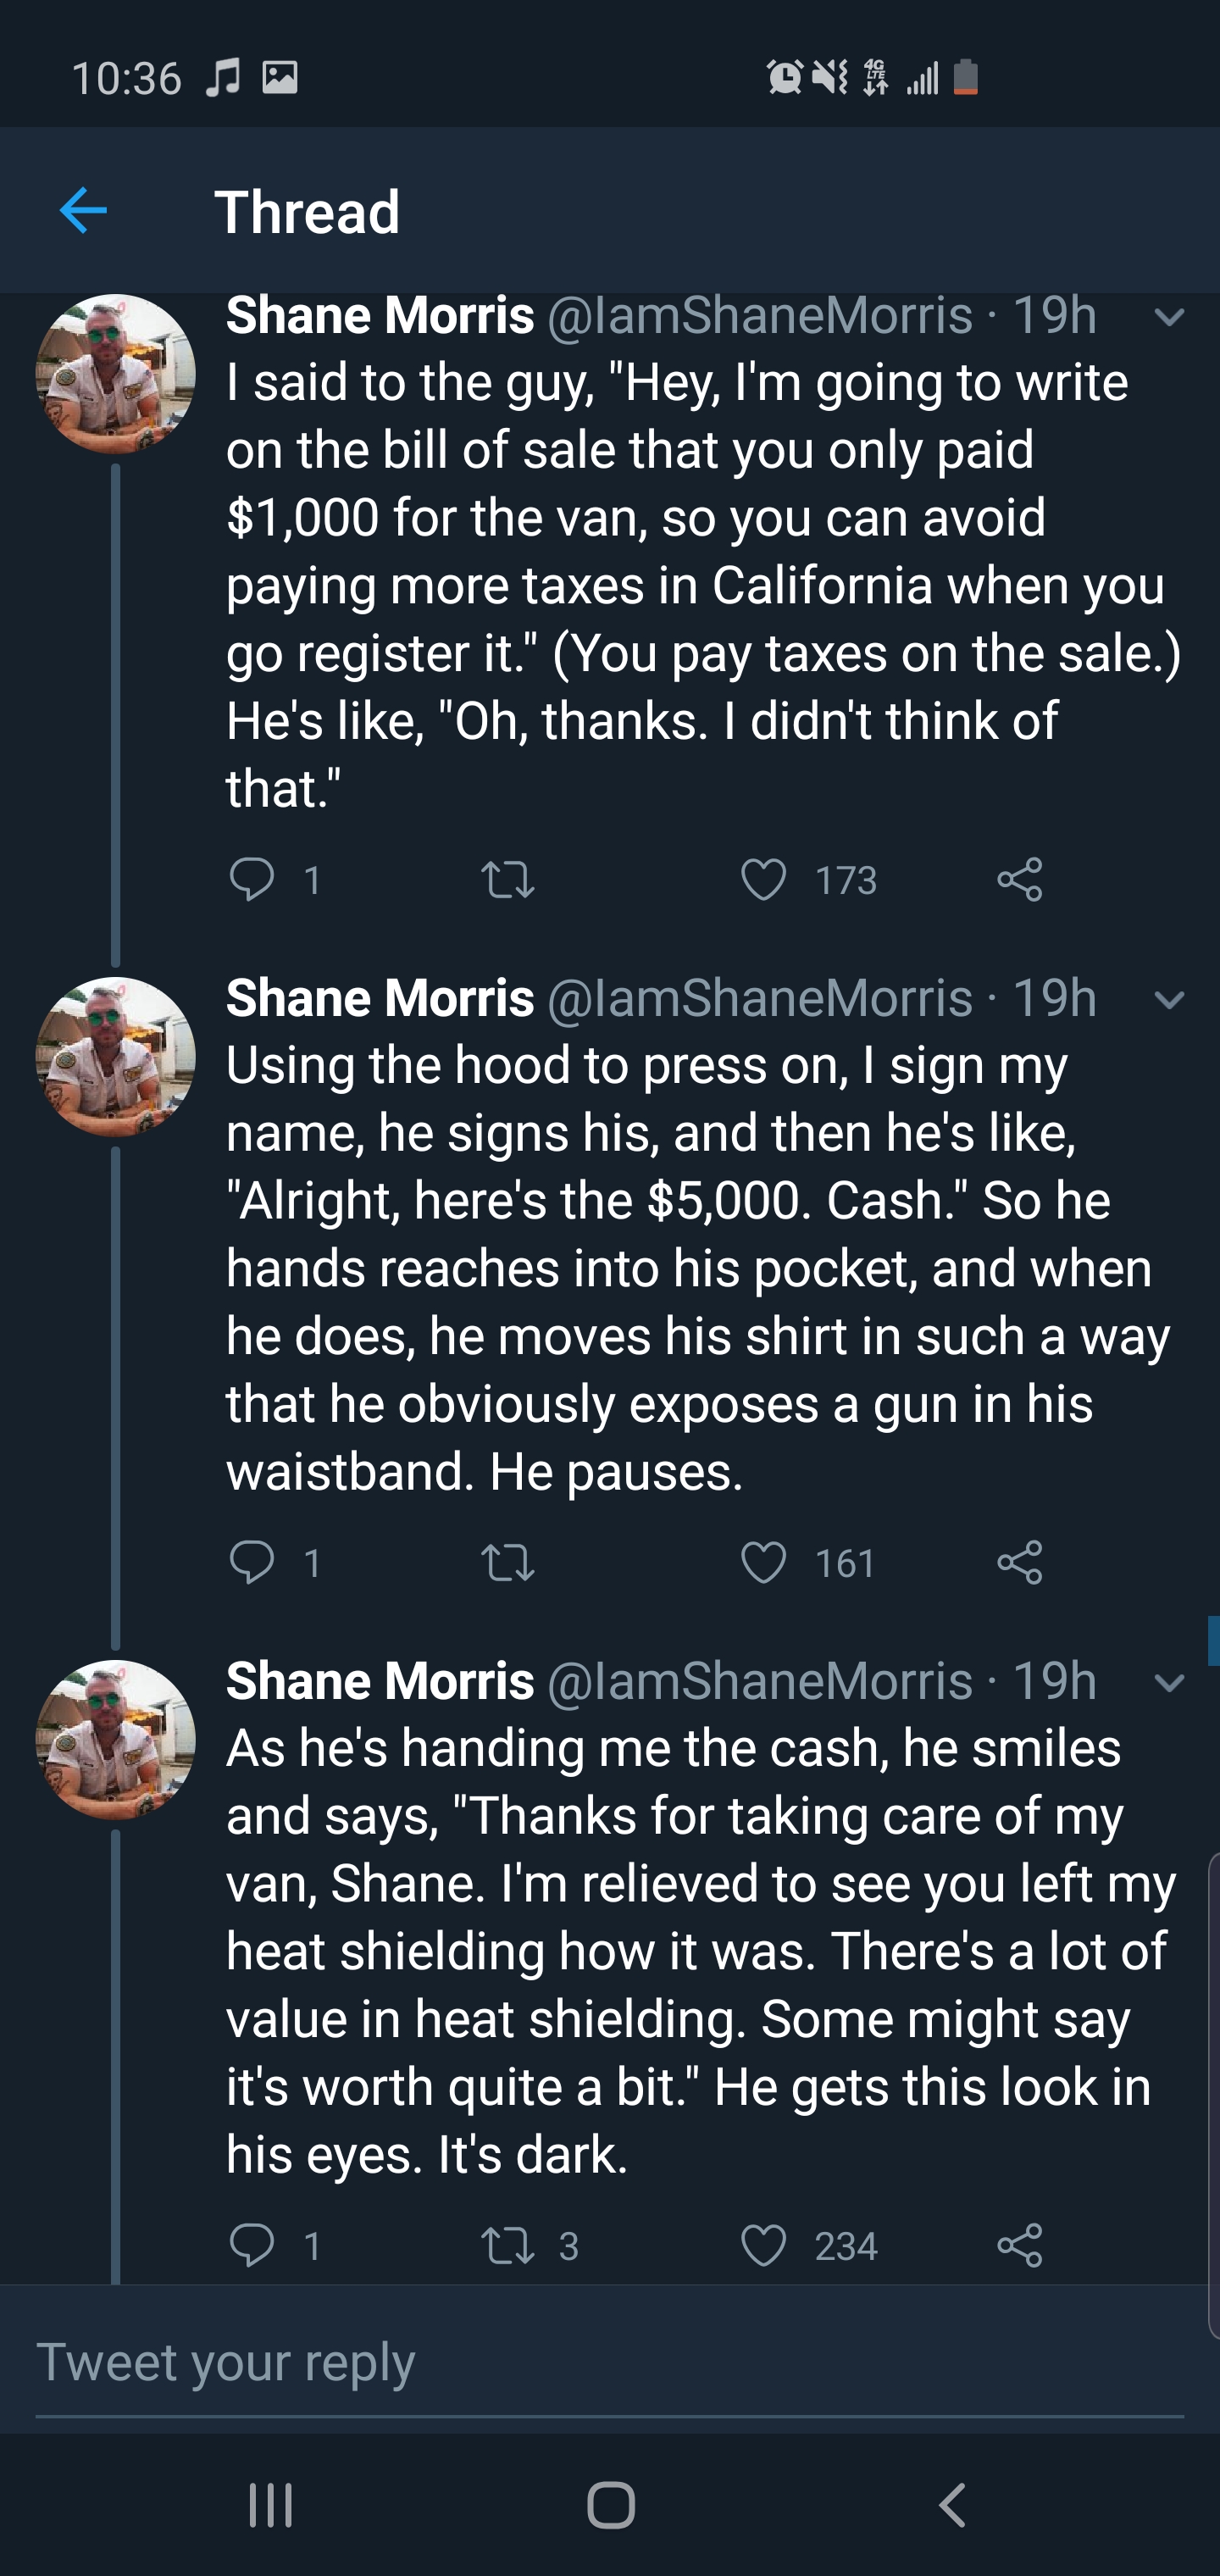 screenshot - Pe On Thread Shane Morris 19h I said to the guy, "Hey, I'm going to write on the bill of sale that you only paid $1,000 for the van, so you can avoid paying more taxes in California when you go register it." You pay taxes on the sale. He's , 